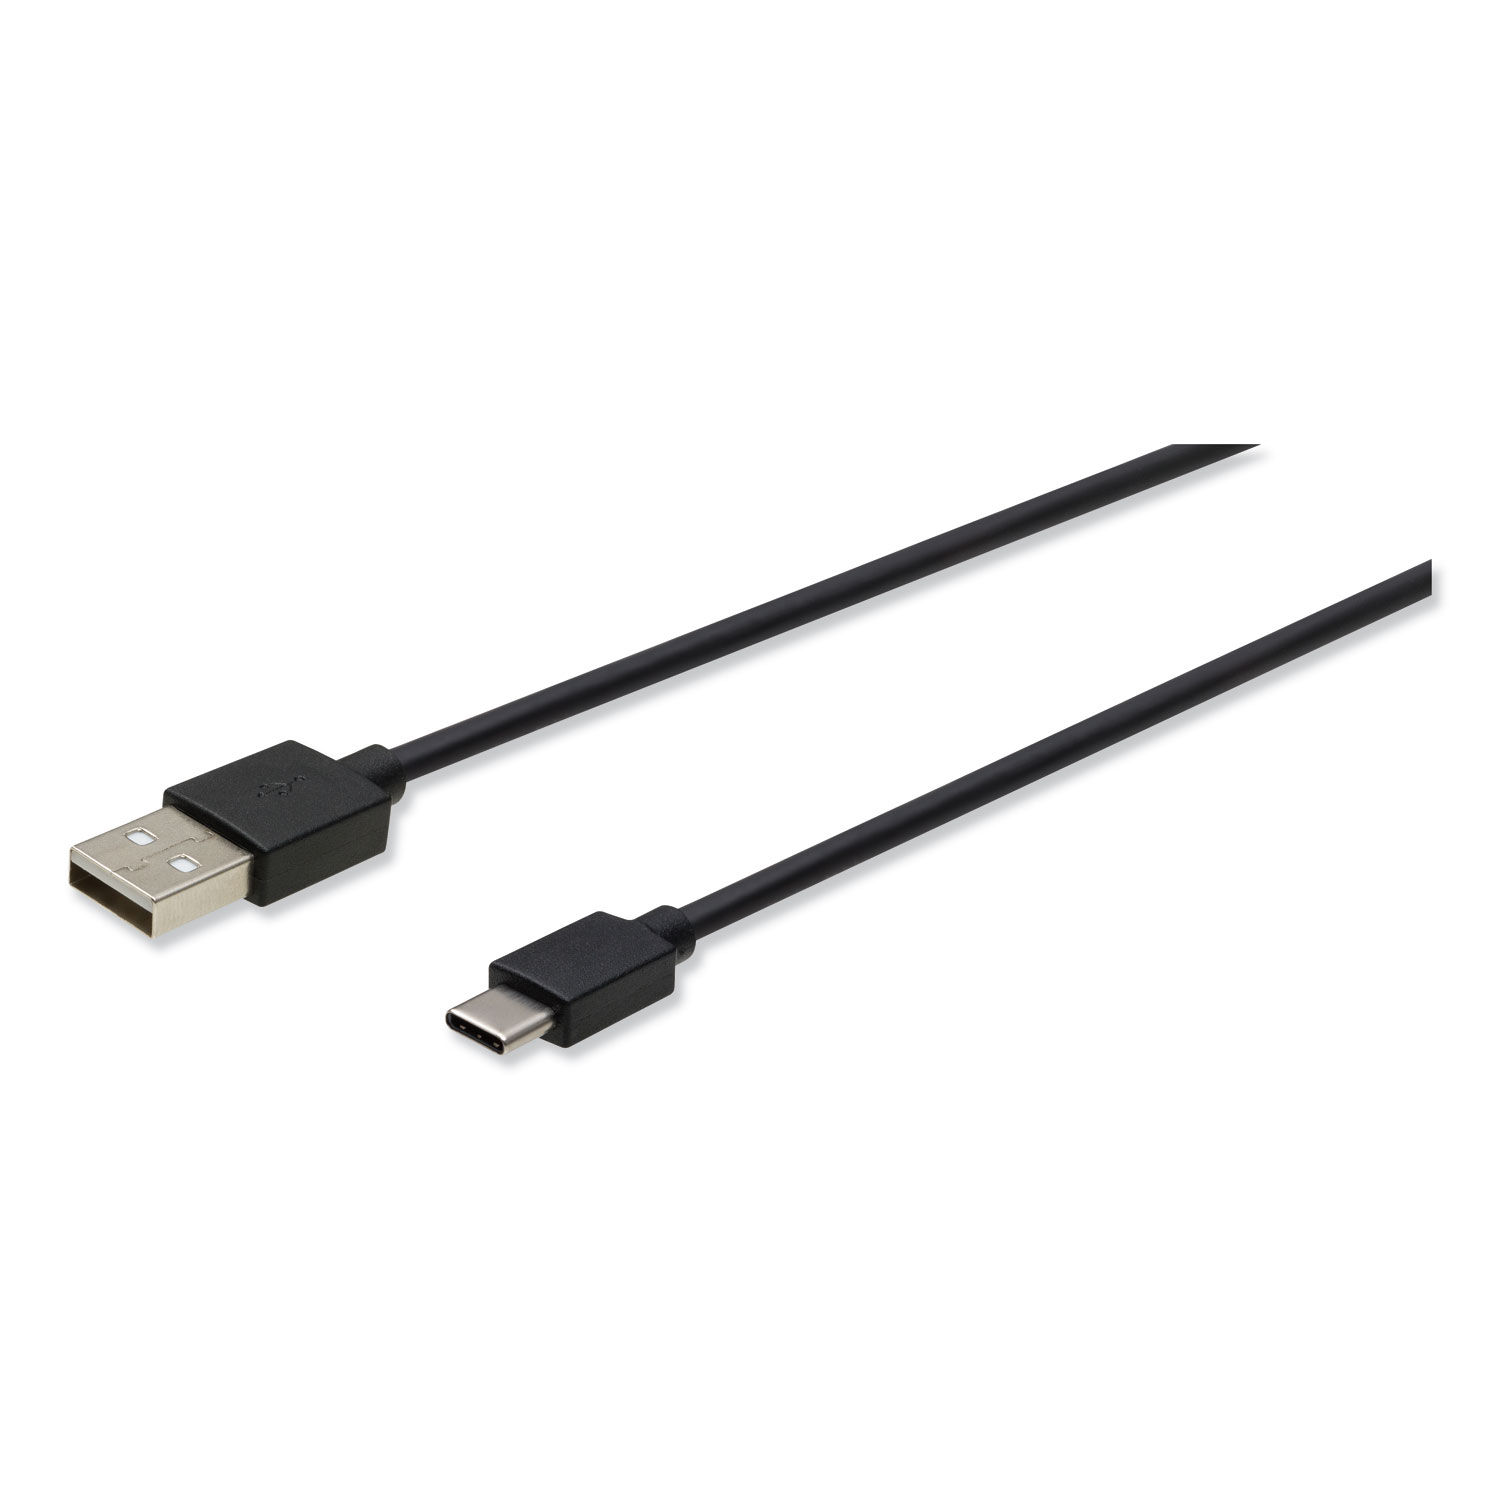 USB to USB-C Cable 10 ft, Black